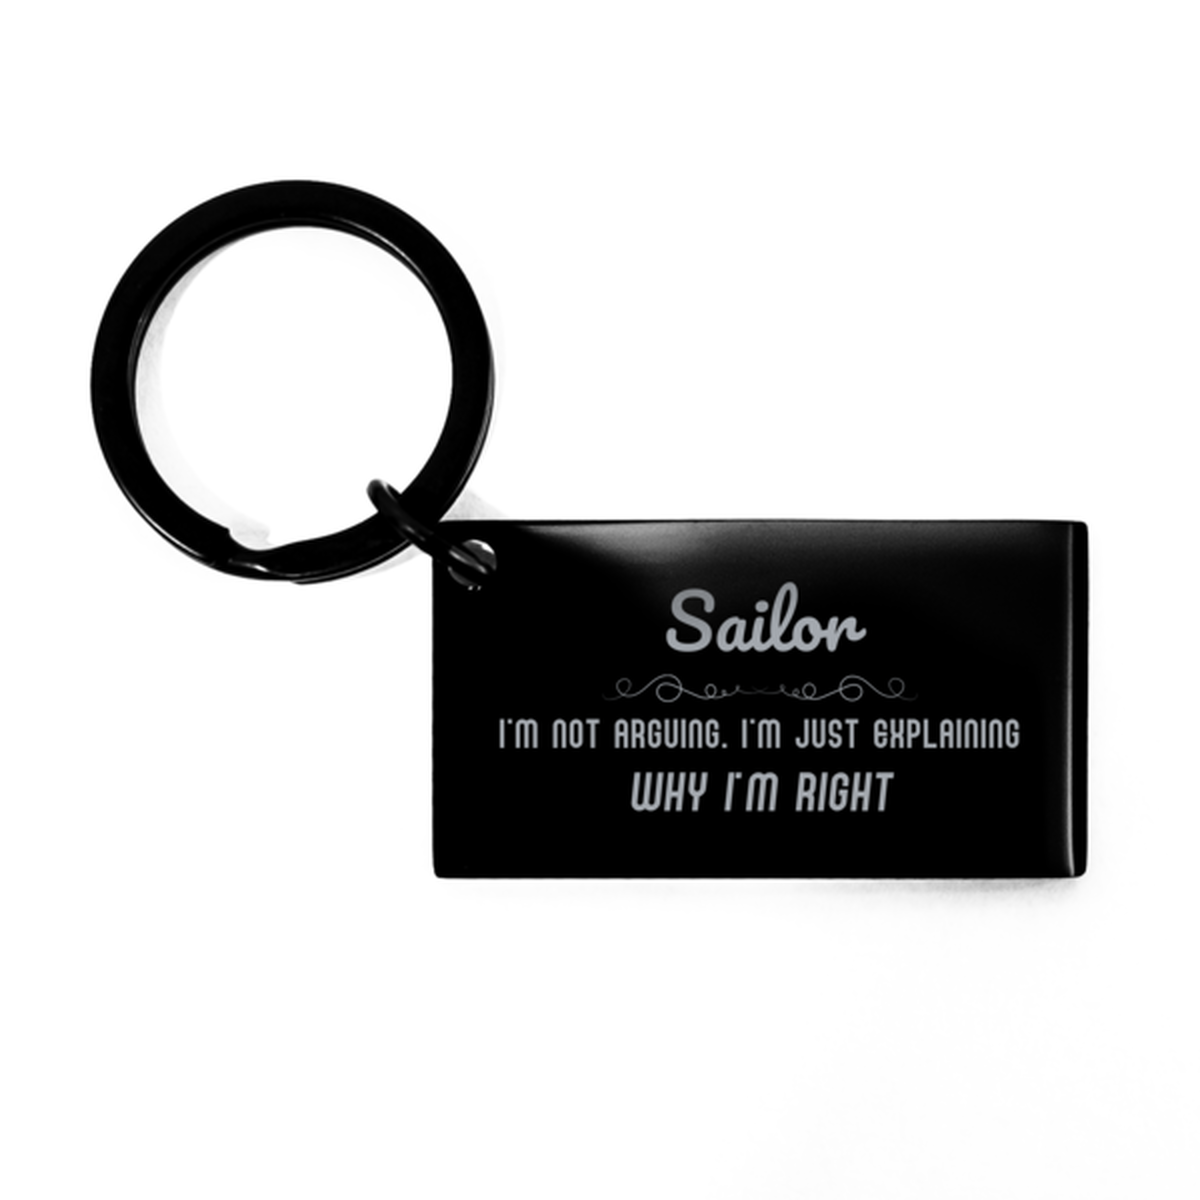 Sailor I'm not Arguing. I'm Just Explaining Why I'm RIGHT Keychain, Funny Saying Quote Sailor Gifts For Sailor Graduation Birthday Christmas Gifts for Men Women Coworker